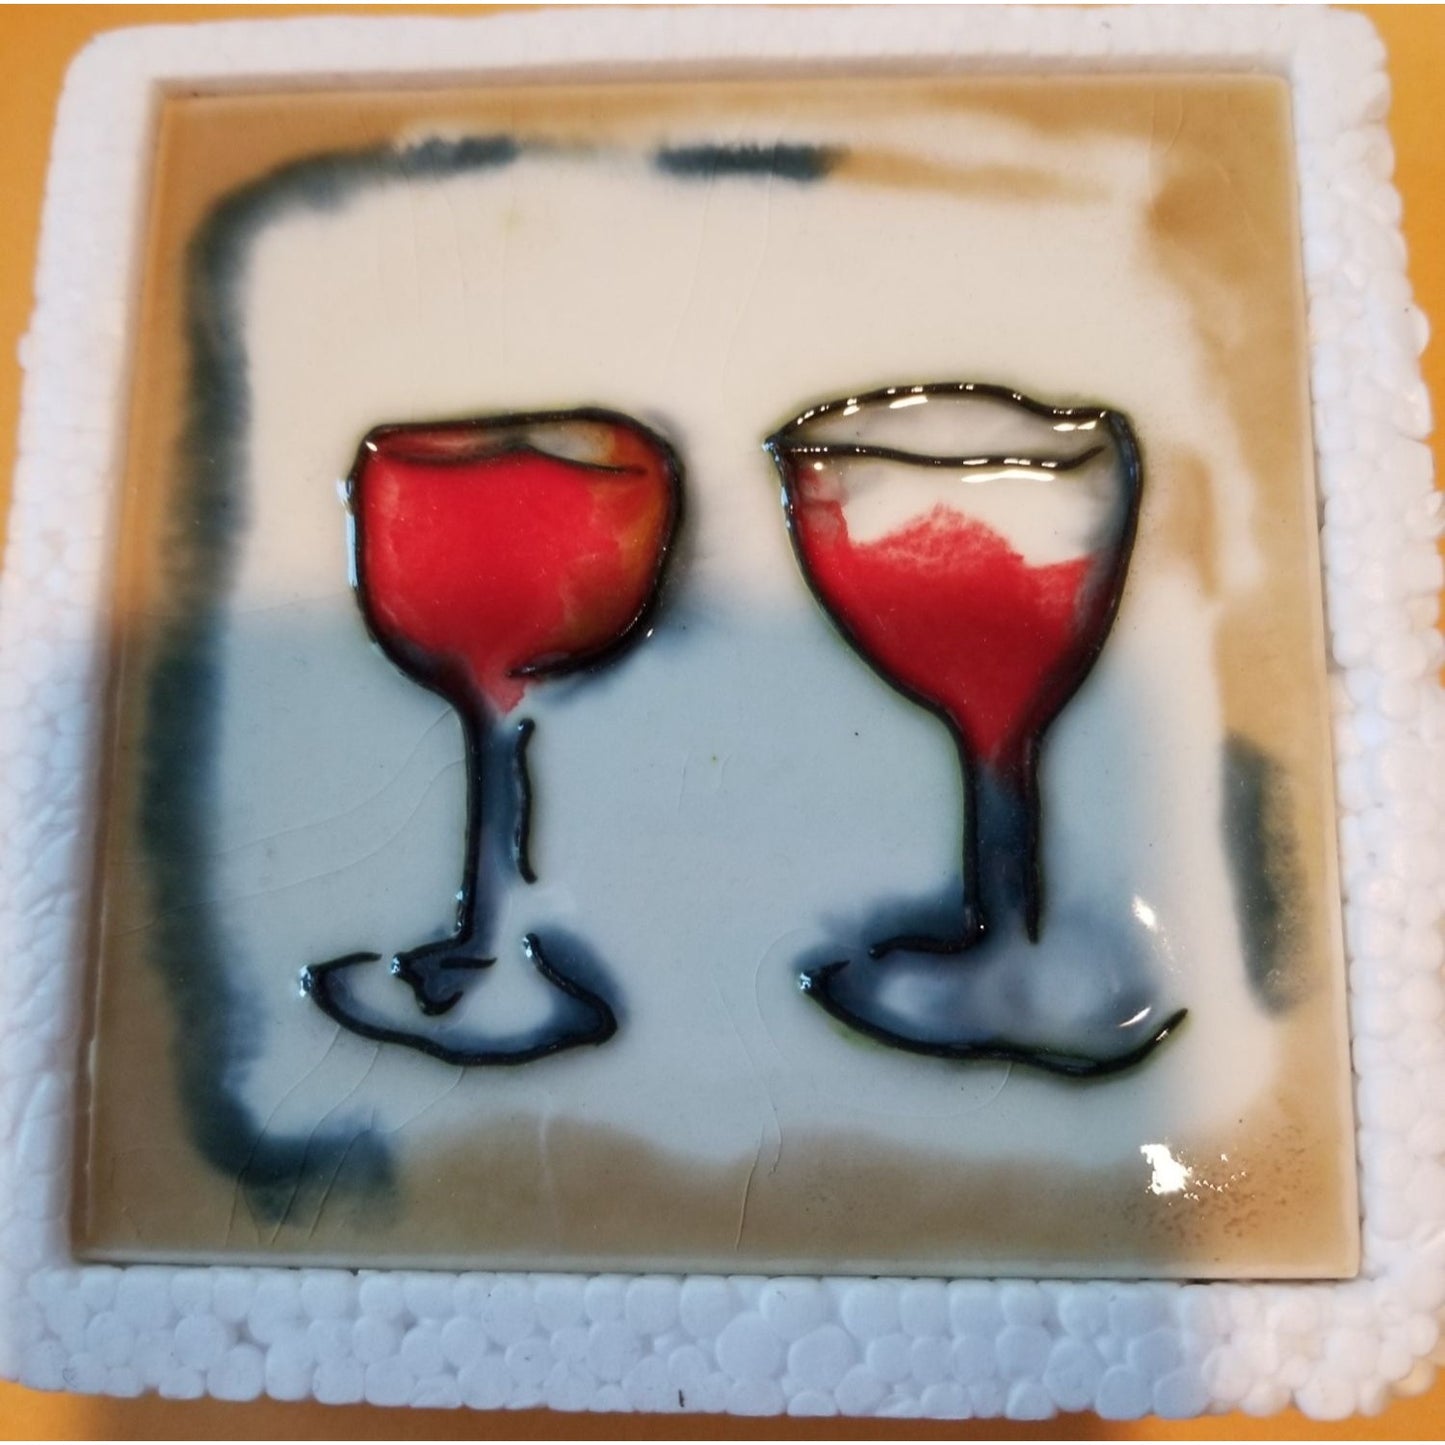 Art Tile 4" x 4" Muddy Waters Hand Painted 7A031 ArtWork on Tile Wine 3 Two Wine Glasses 1/2 " Ceramic Tile and backing